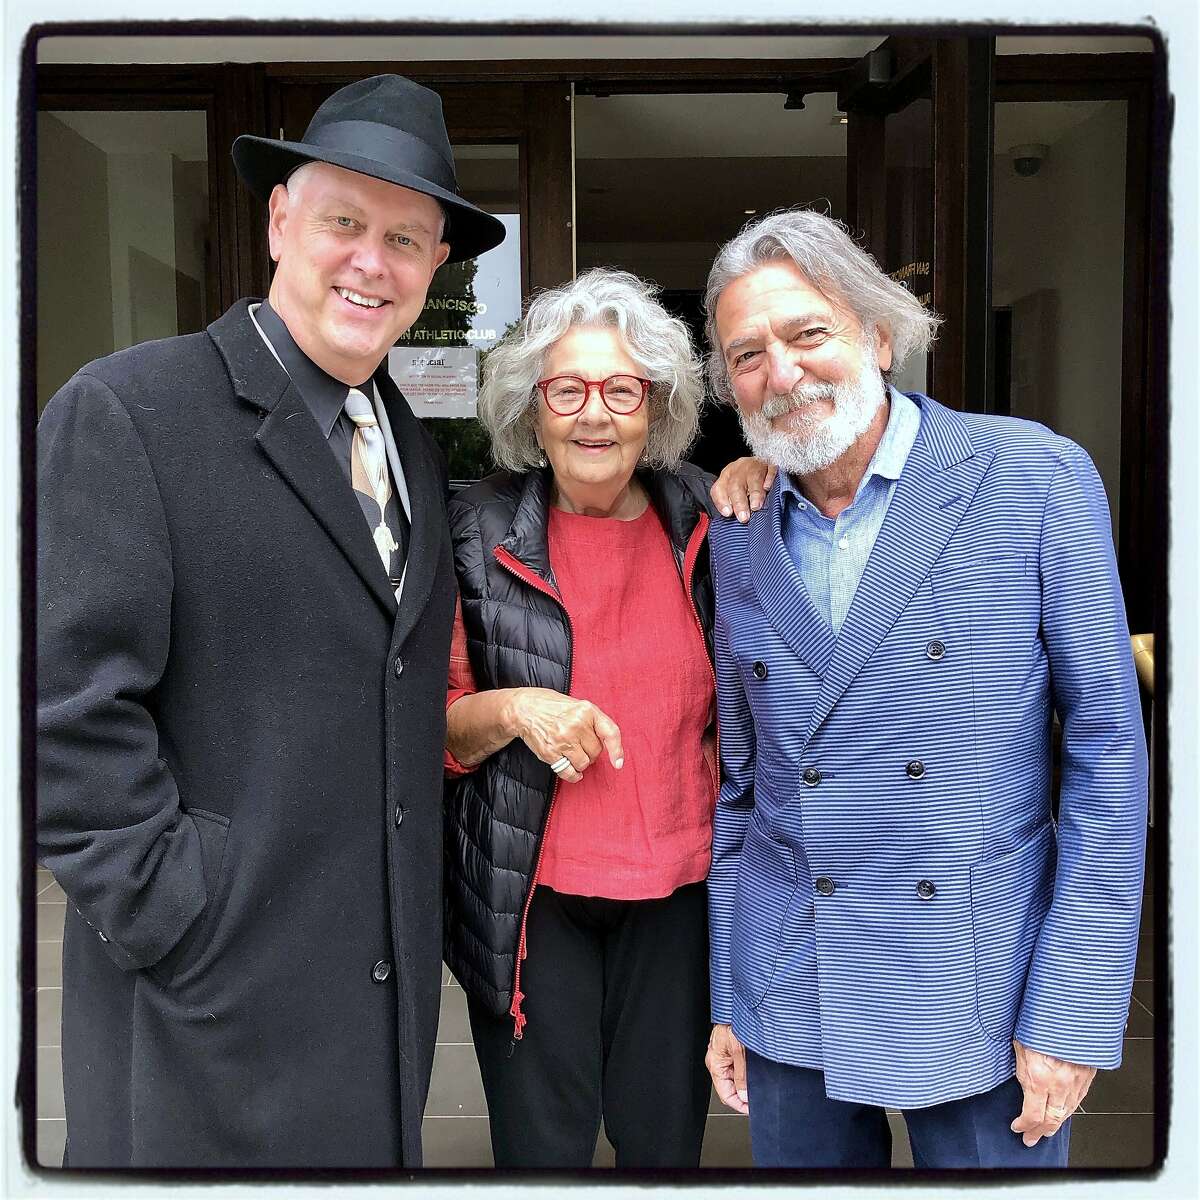 Noir Czar Eddie Muller (left) with Jeannette Etheredge and actor Don Novello at the Litquake "Godfather" fundraiser. July 18, 2019.